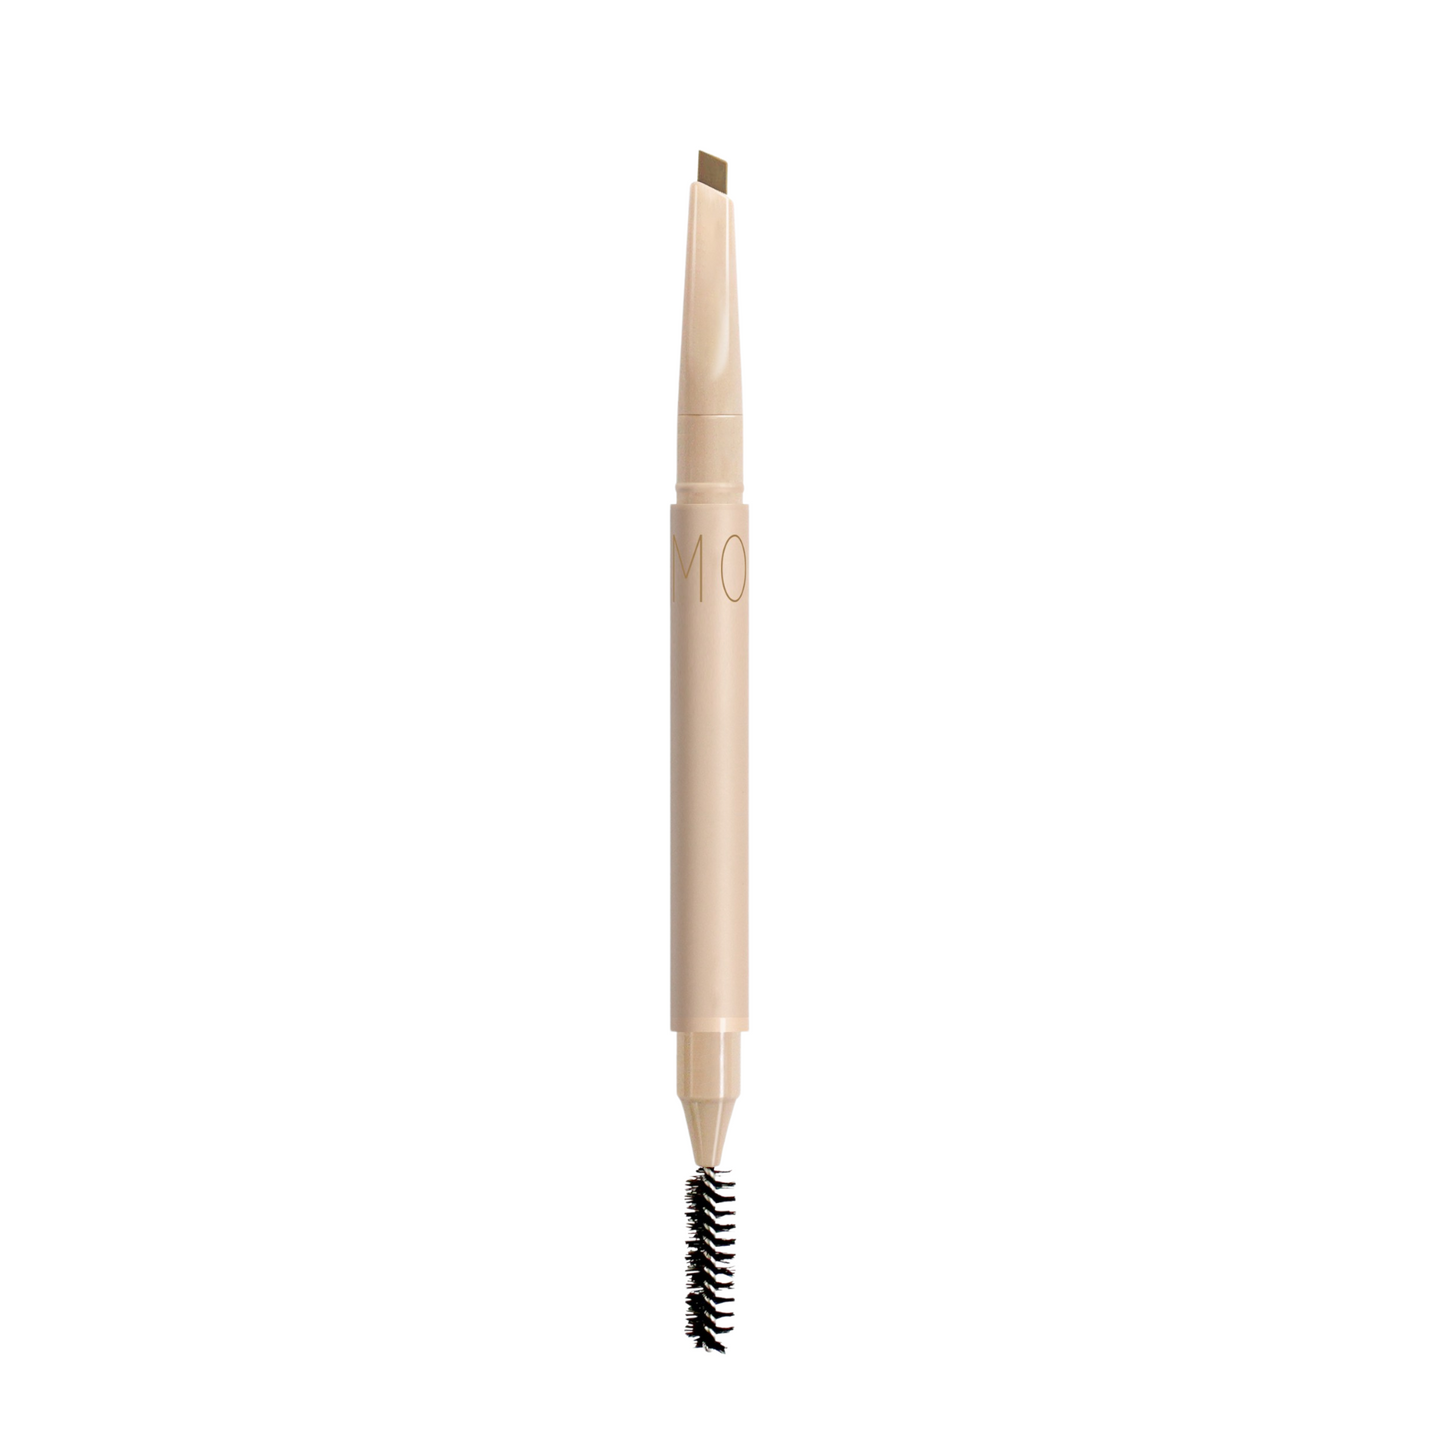 This eyebrow brush contains camellia extract, effective in controlling sebum secretion around the sensitive eye area for precise application.